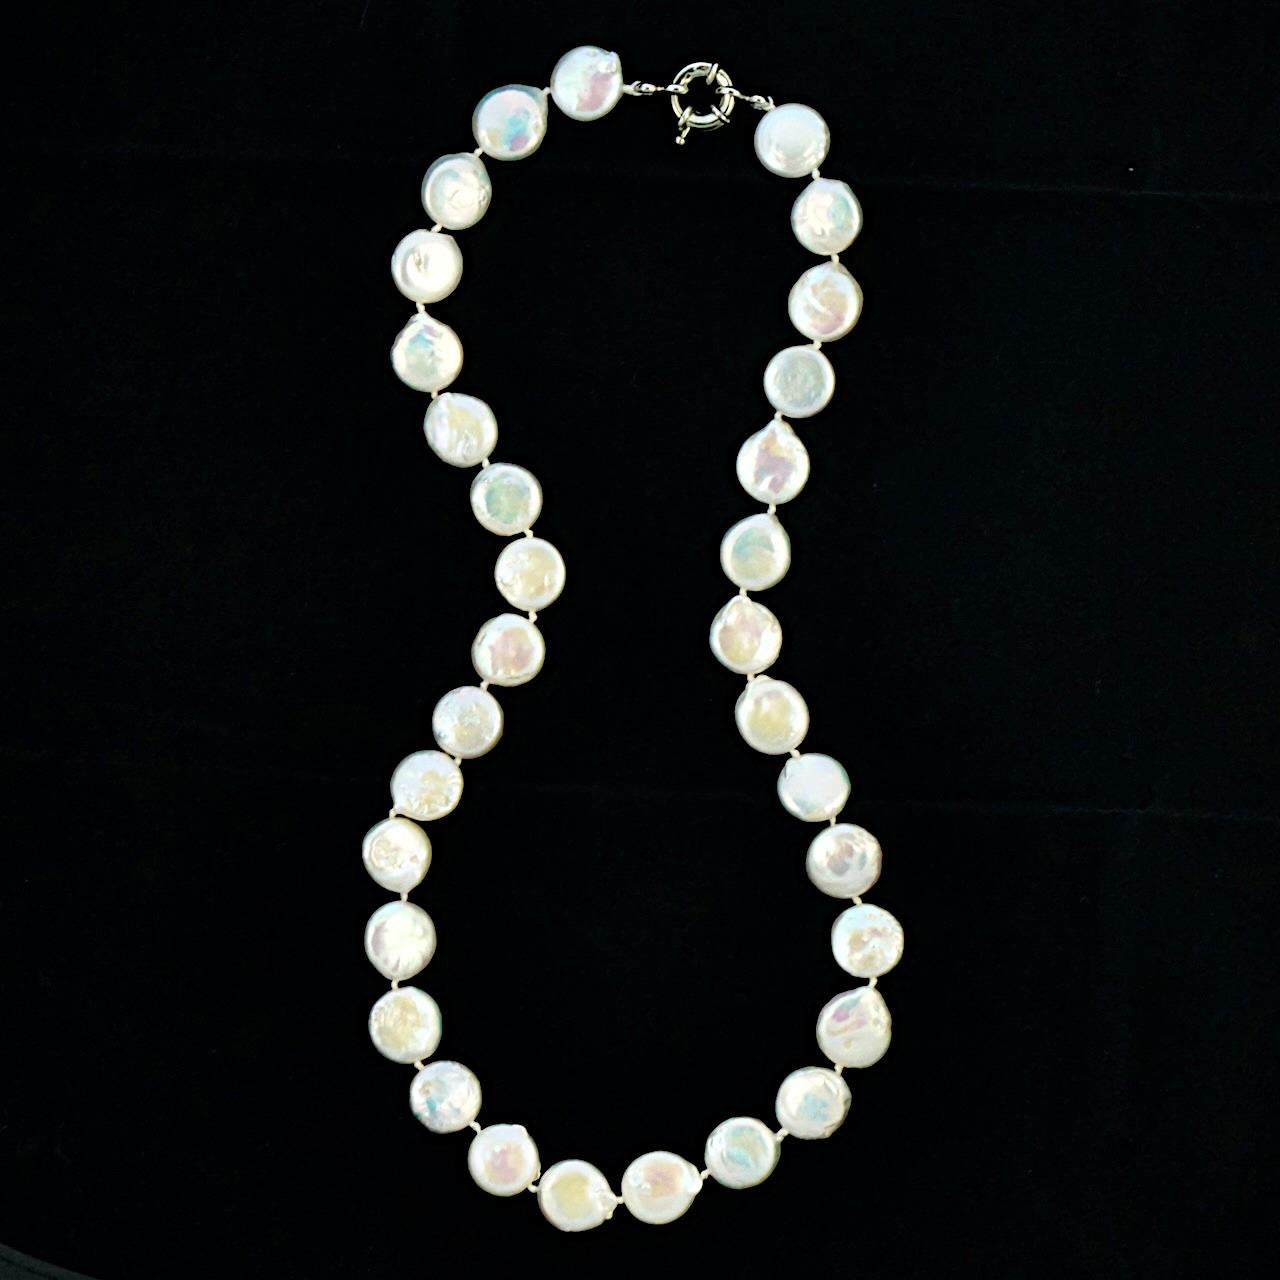 Freshwater Coin Pearl Knotted Necklace with an Iridescent Lustre For Sale 3